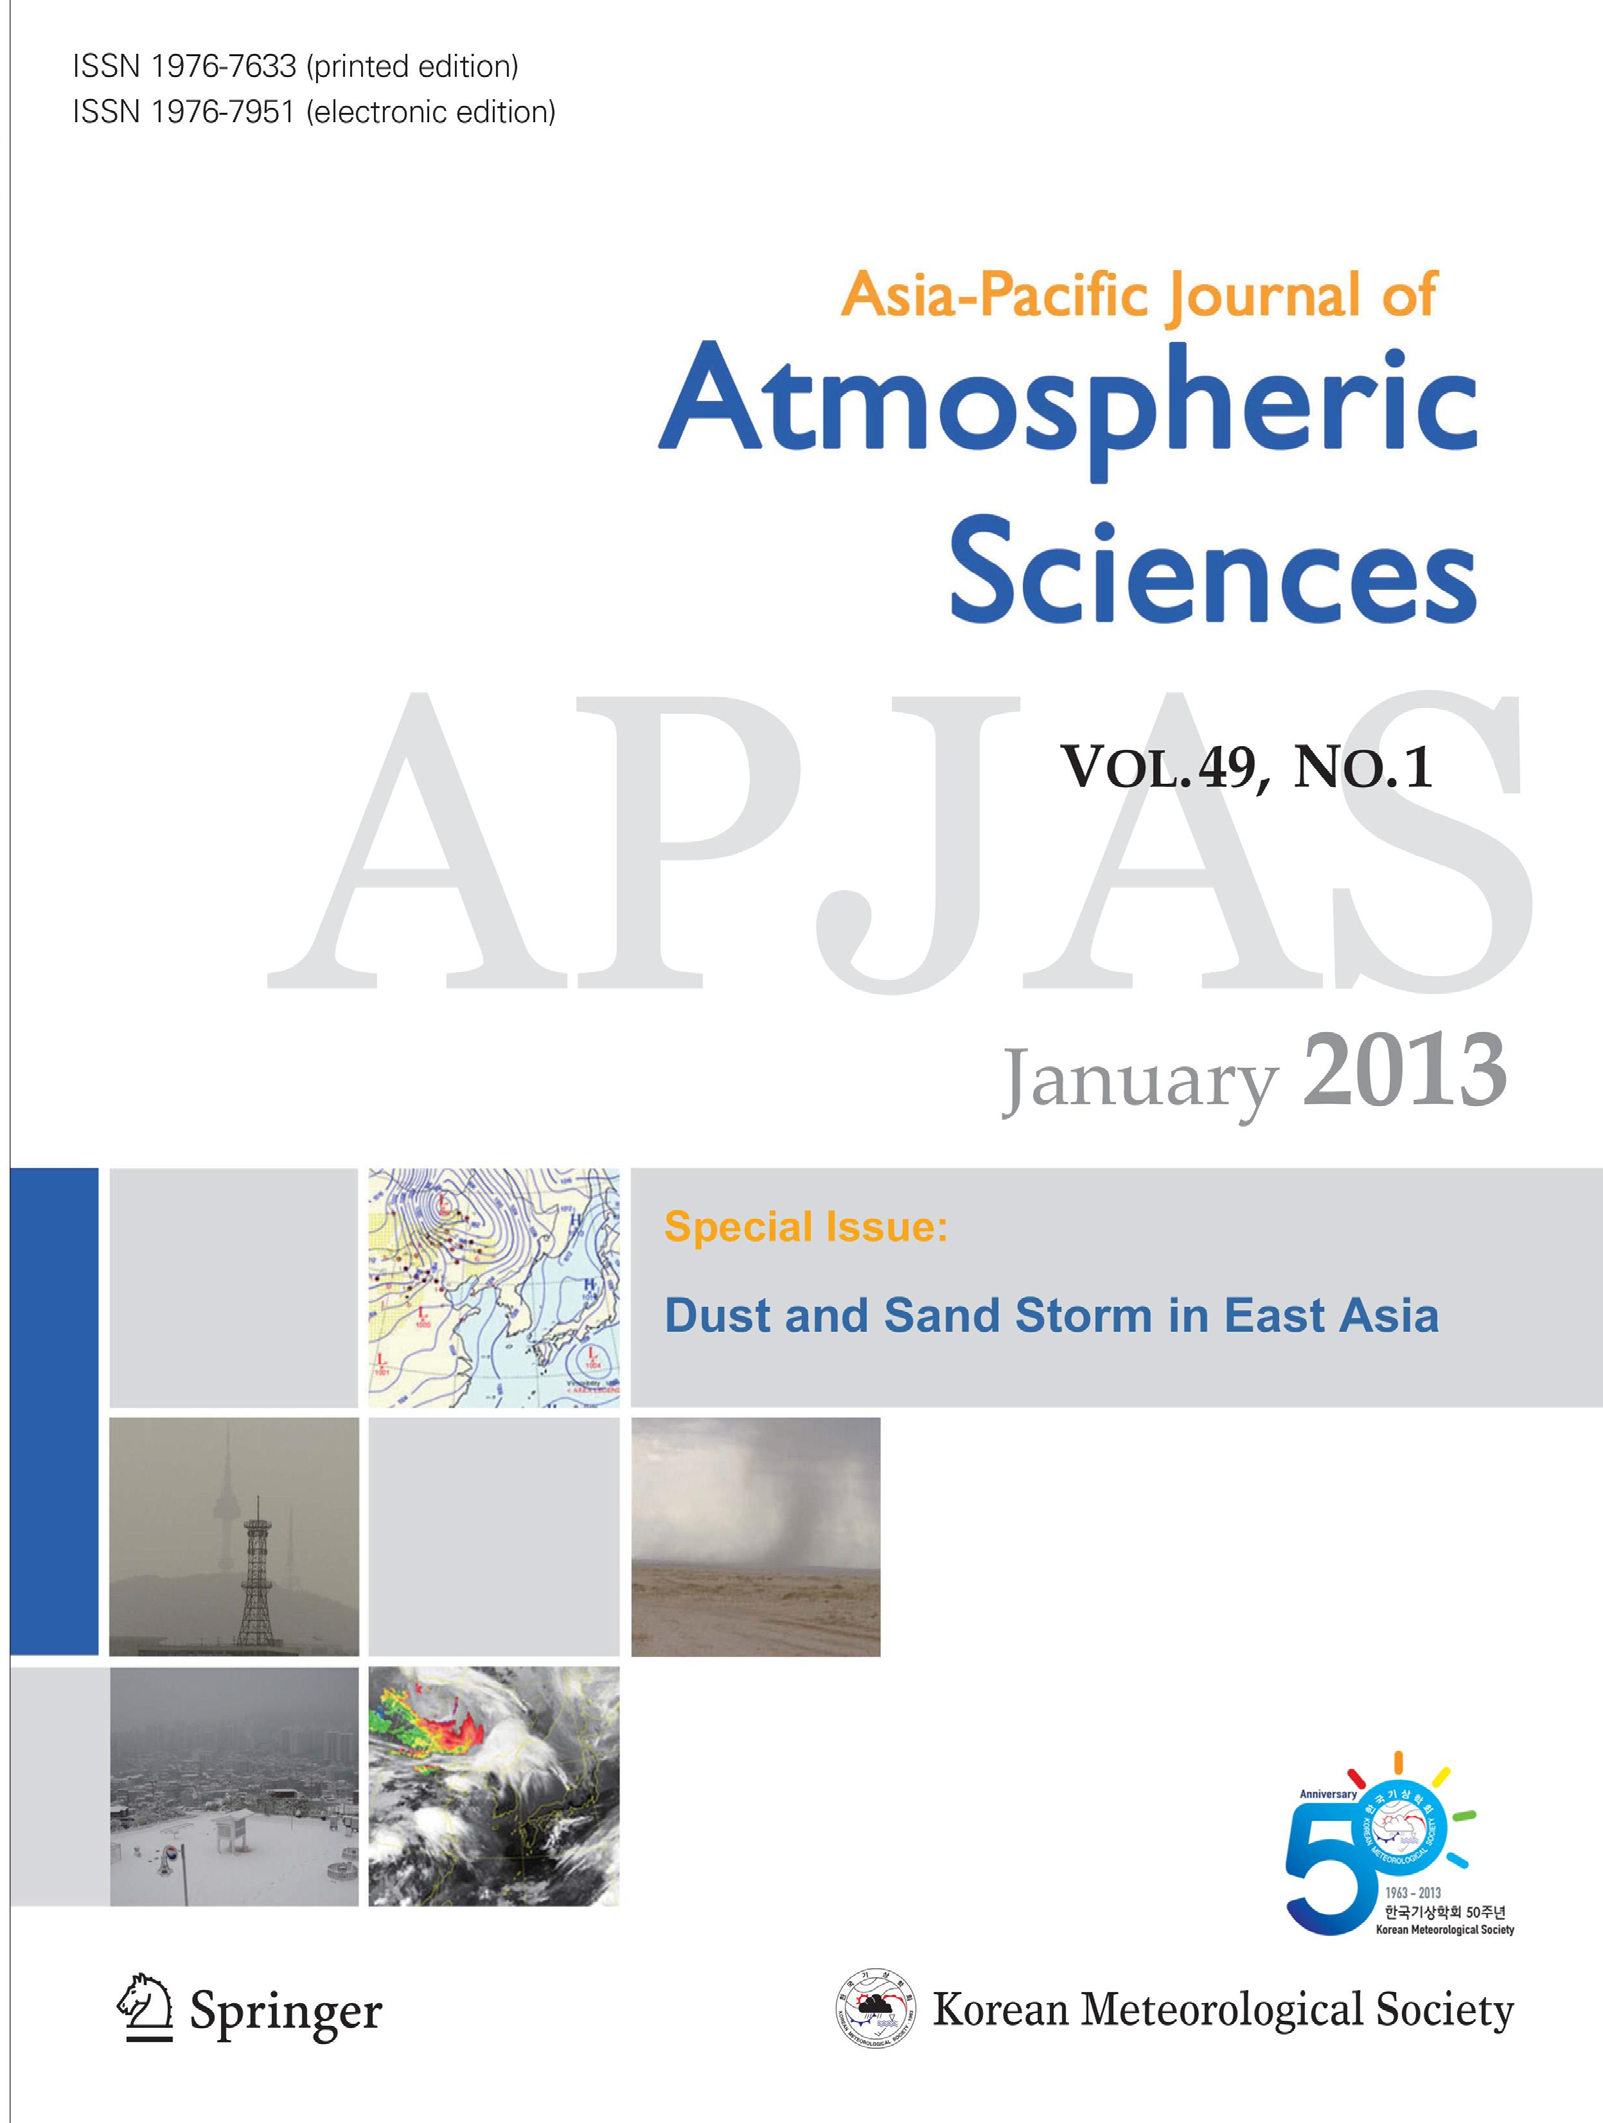 Fig. 4.2.1. Cover page of the APJAS special issue.